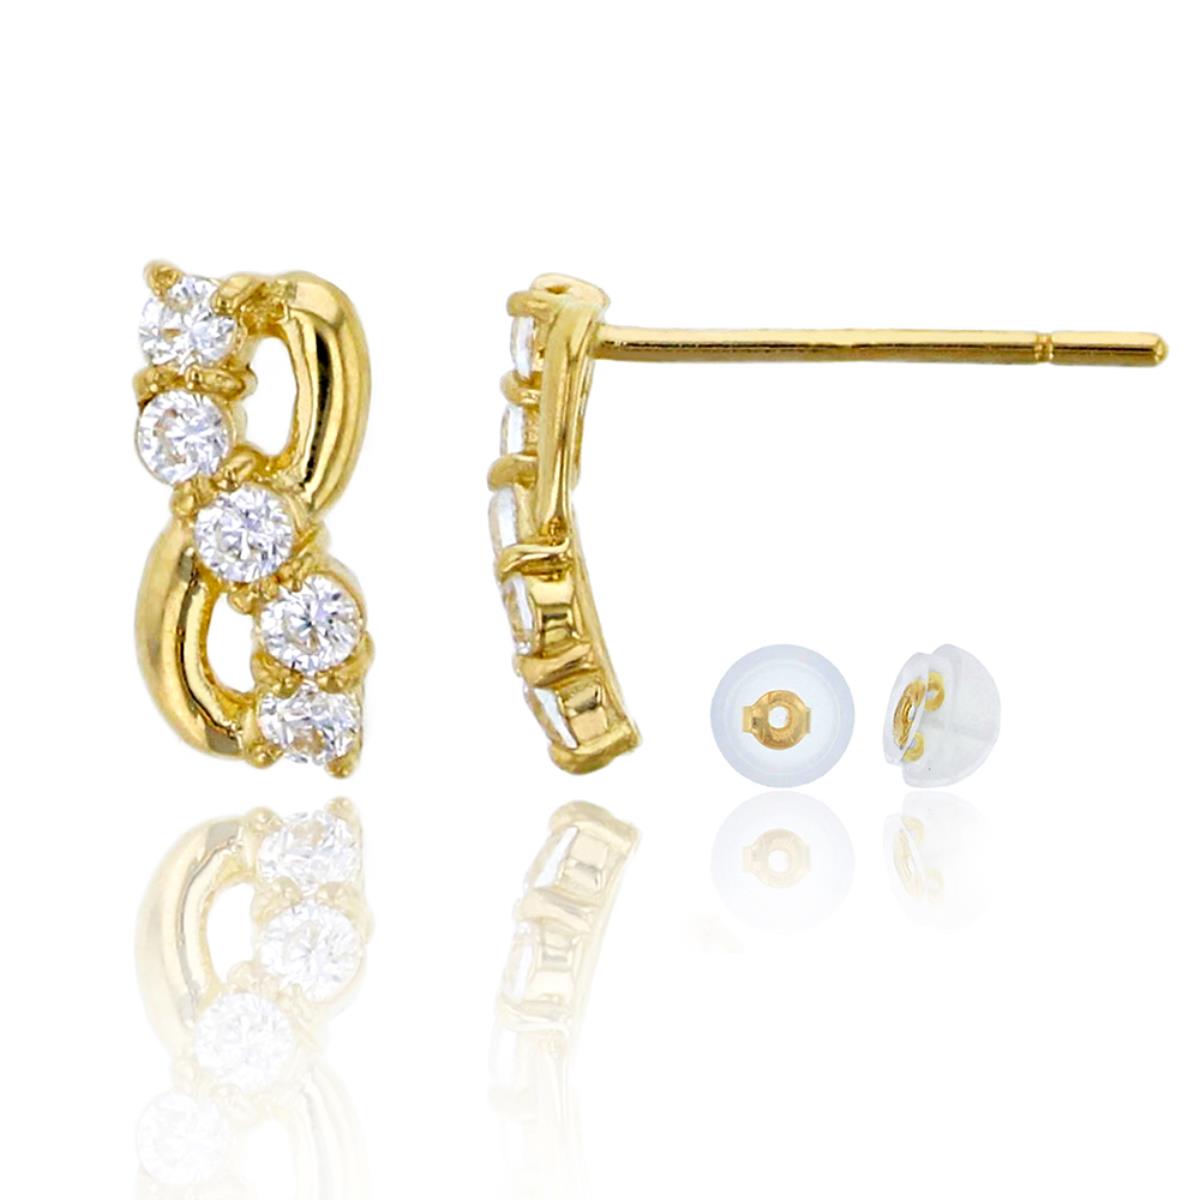 10K Yellow Gold Pave 1.5mm Rd Infinity Stud Earring & 10K Silicone Back